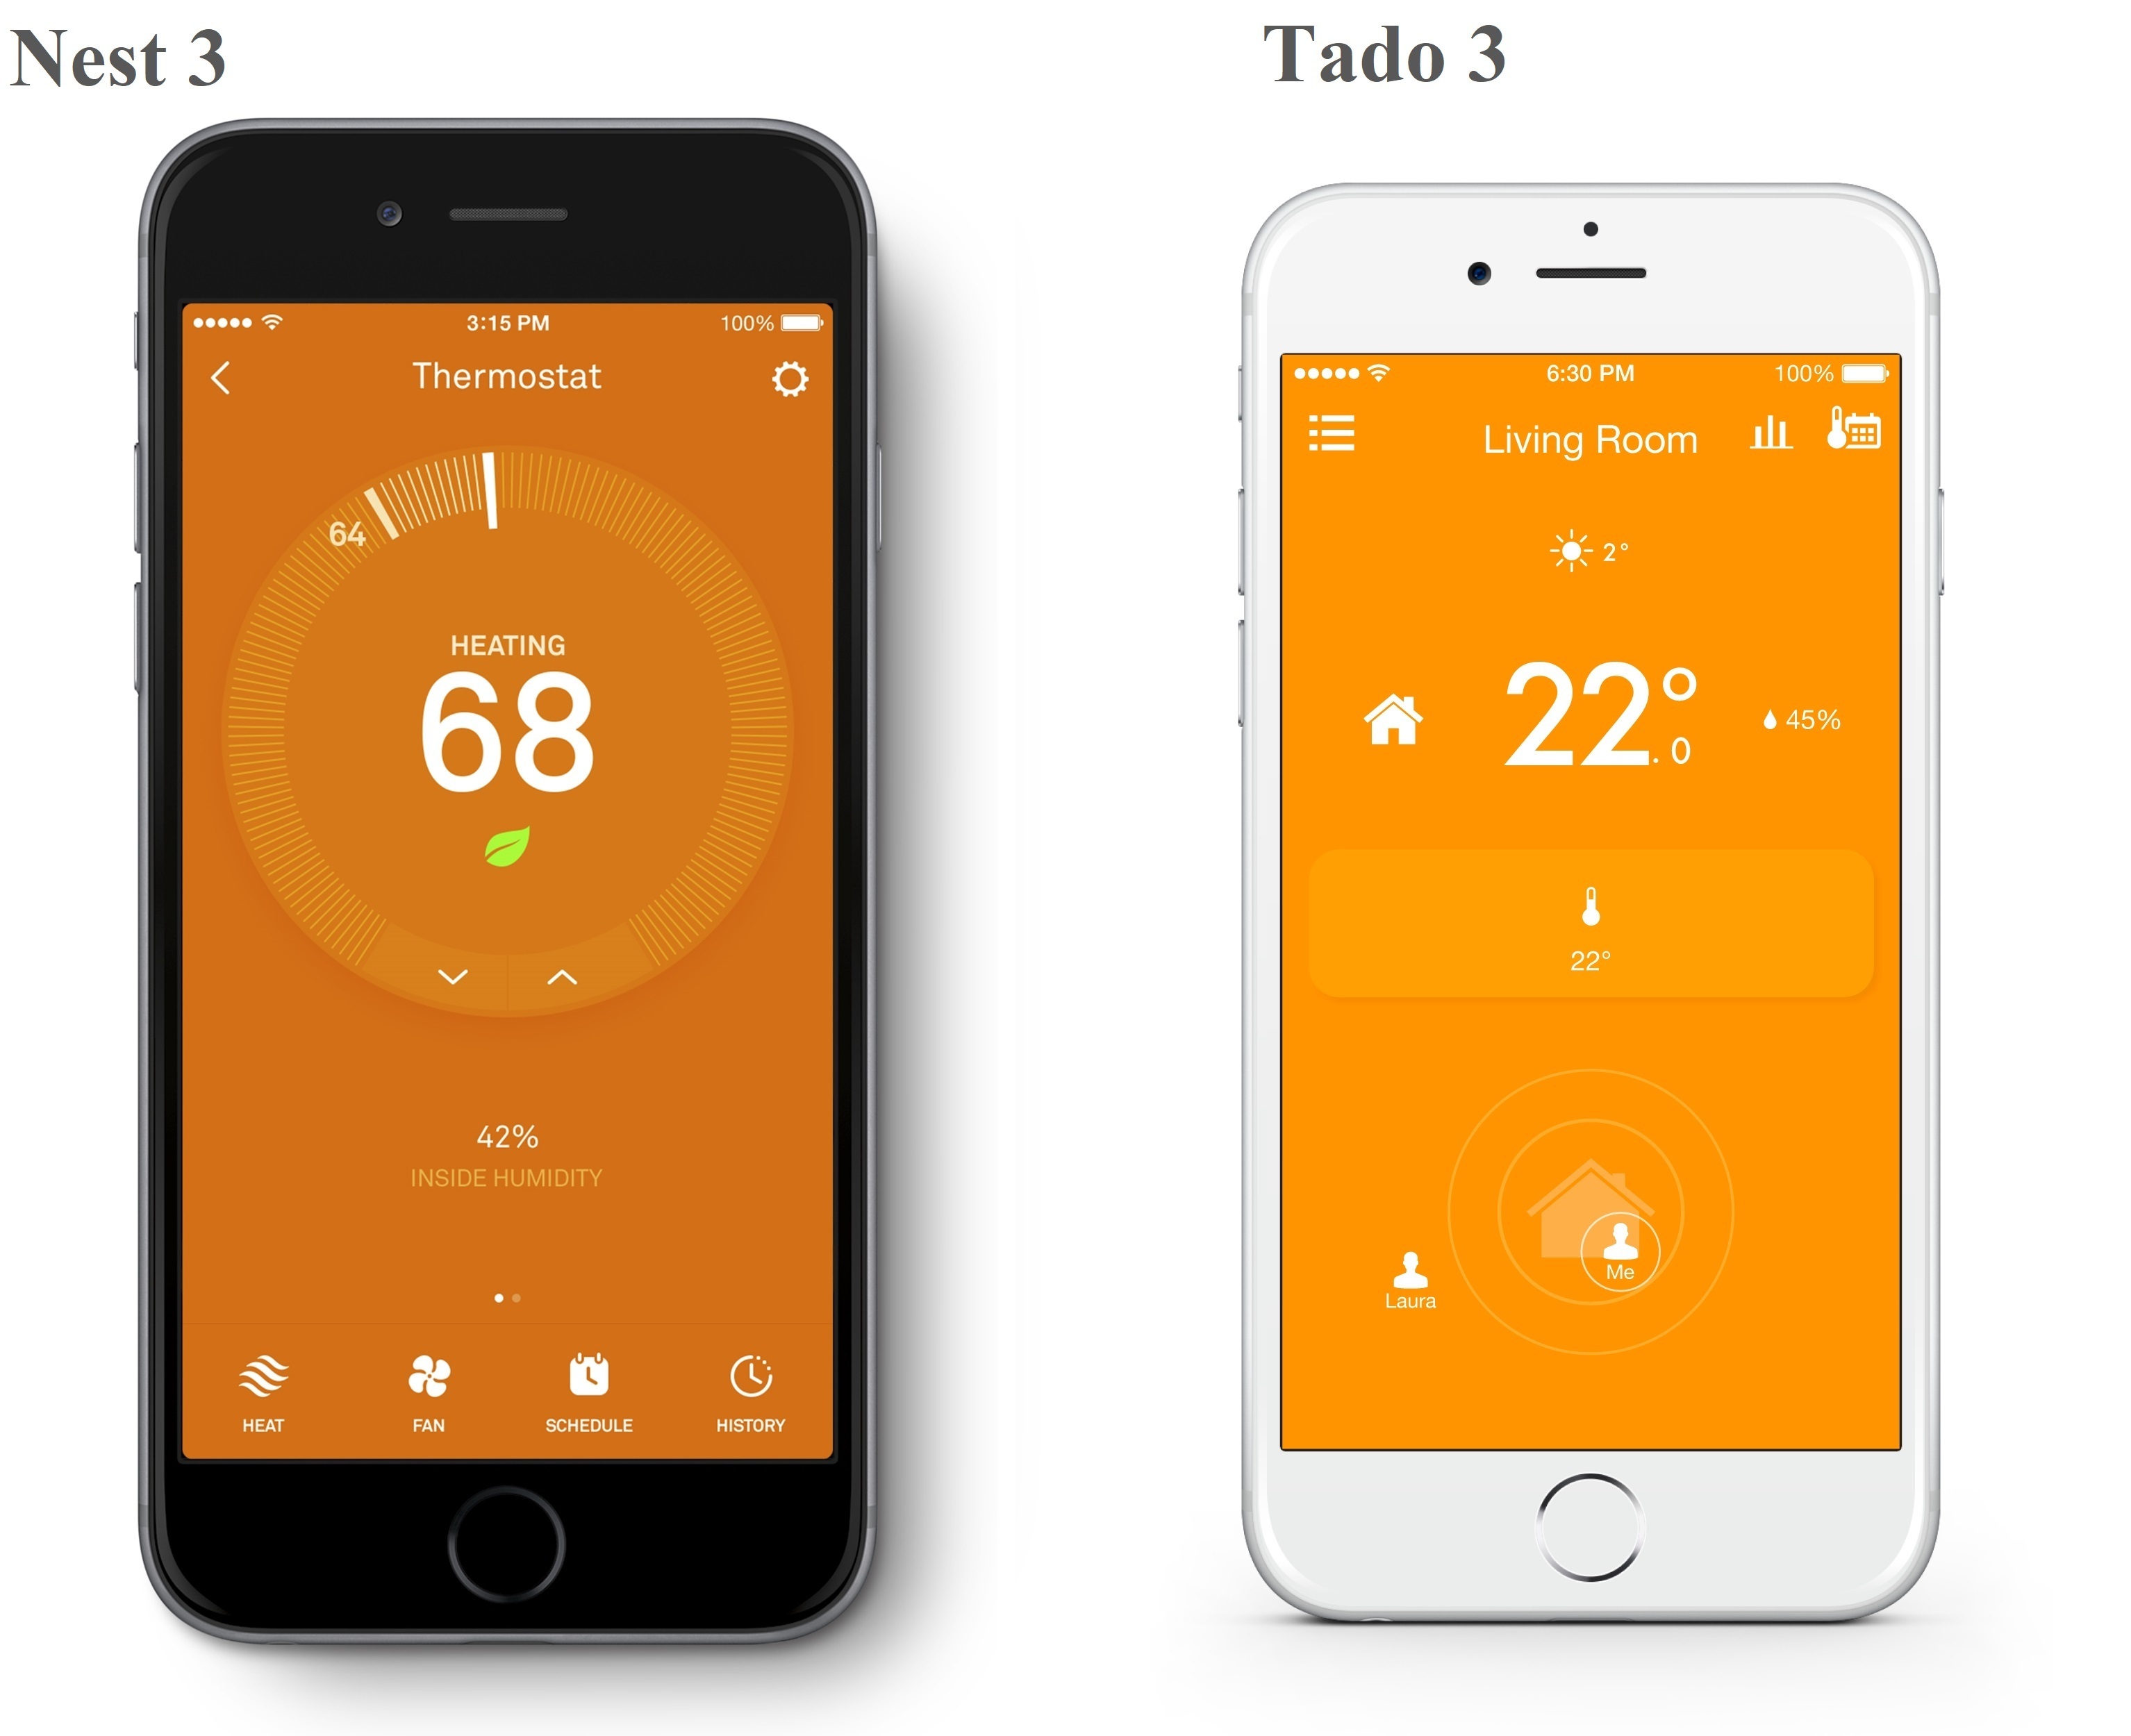 App UIs of Nest (left) and Tado's (right) thermostats.